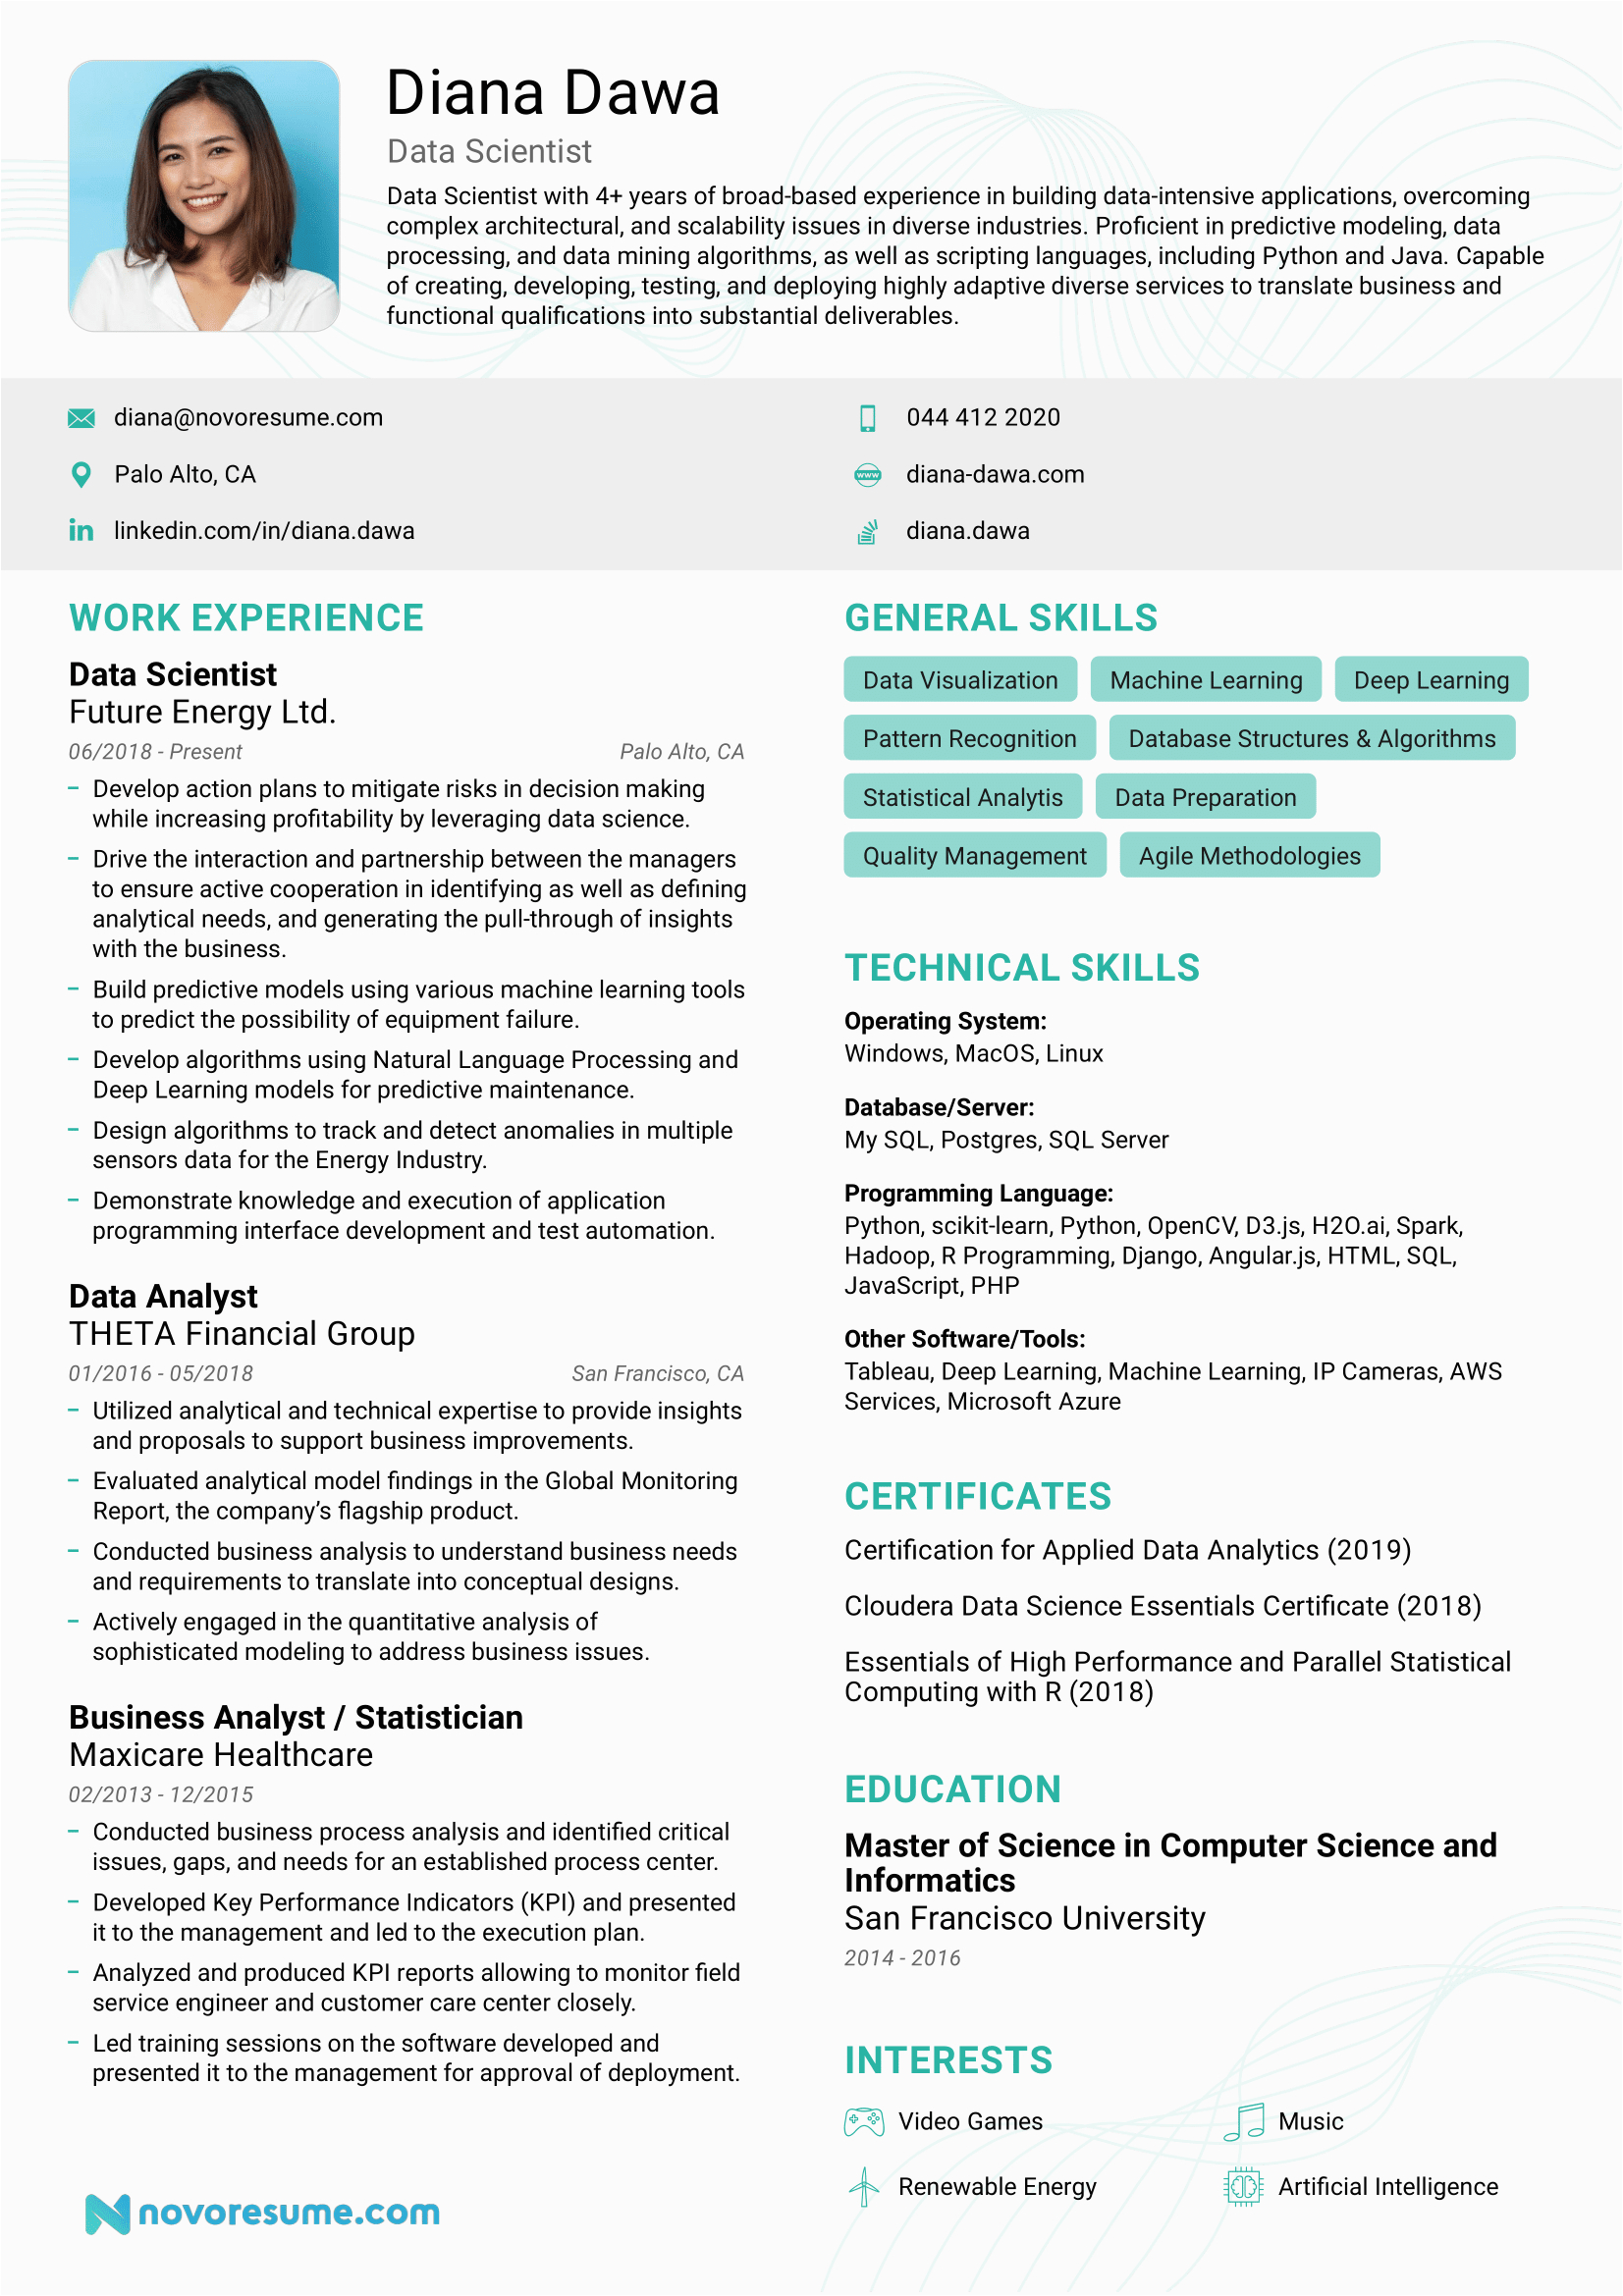 Data Science Resume Sample for Experienced Data Scientist Resume Sample & Guide for 2021